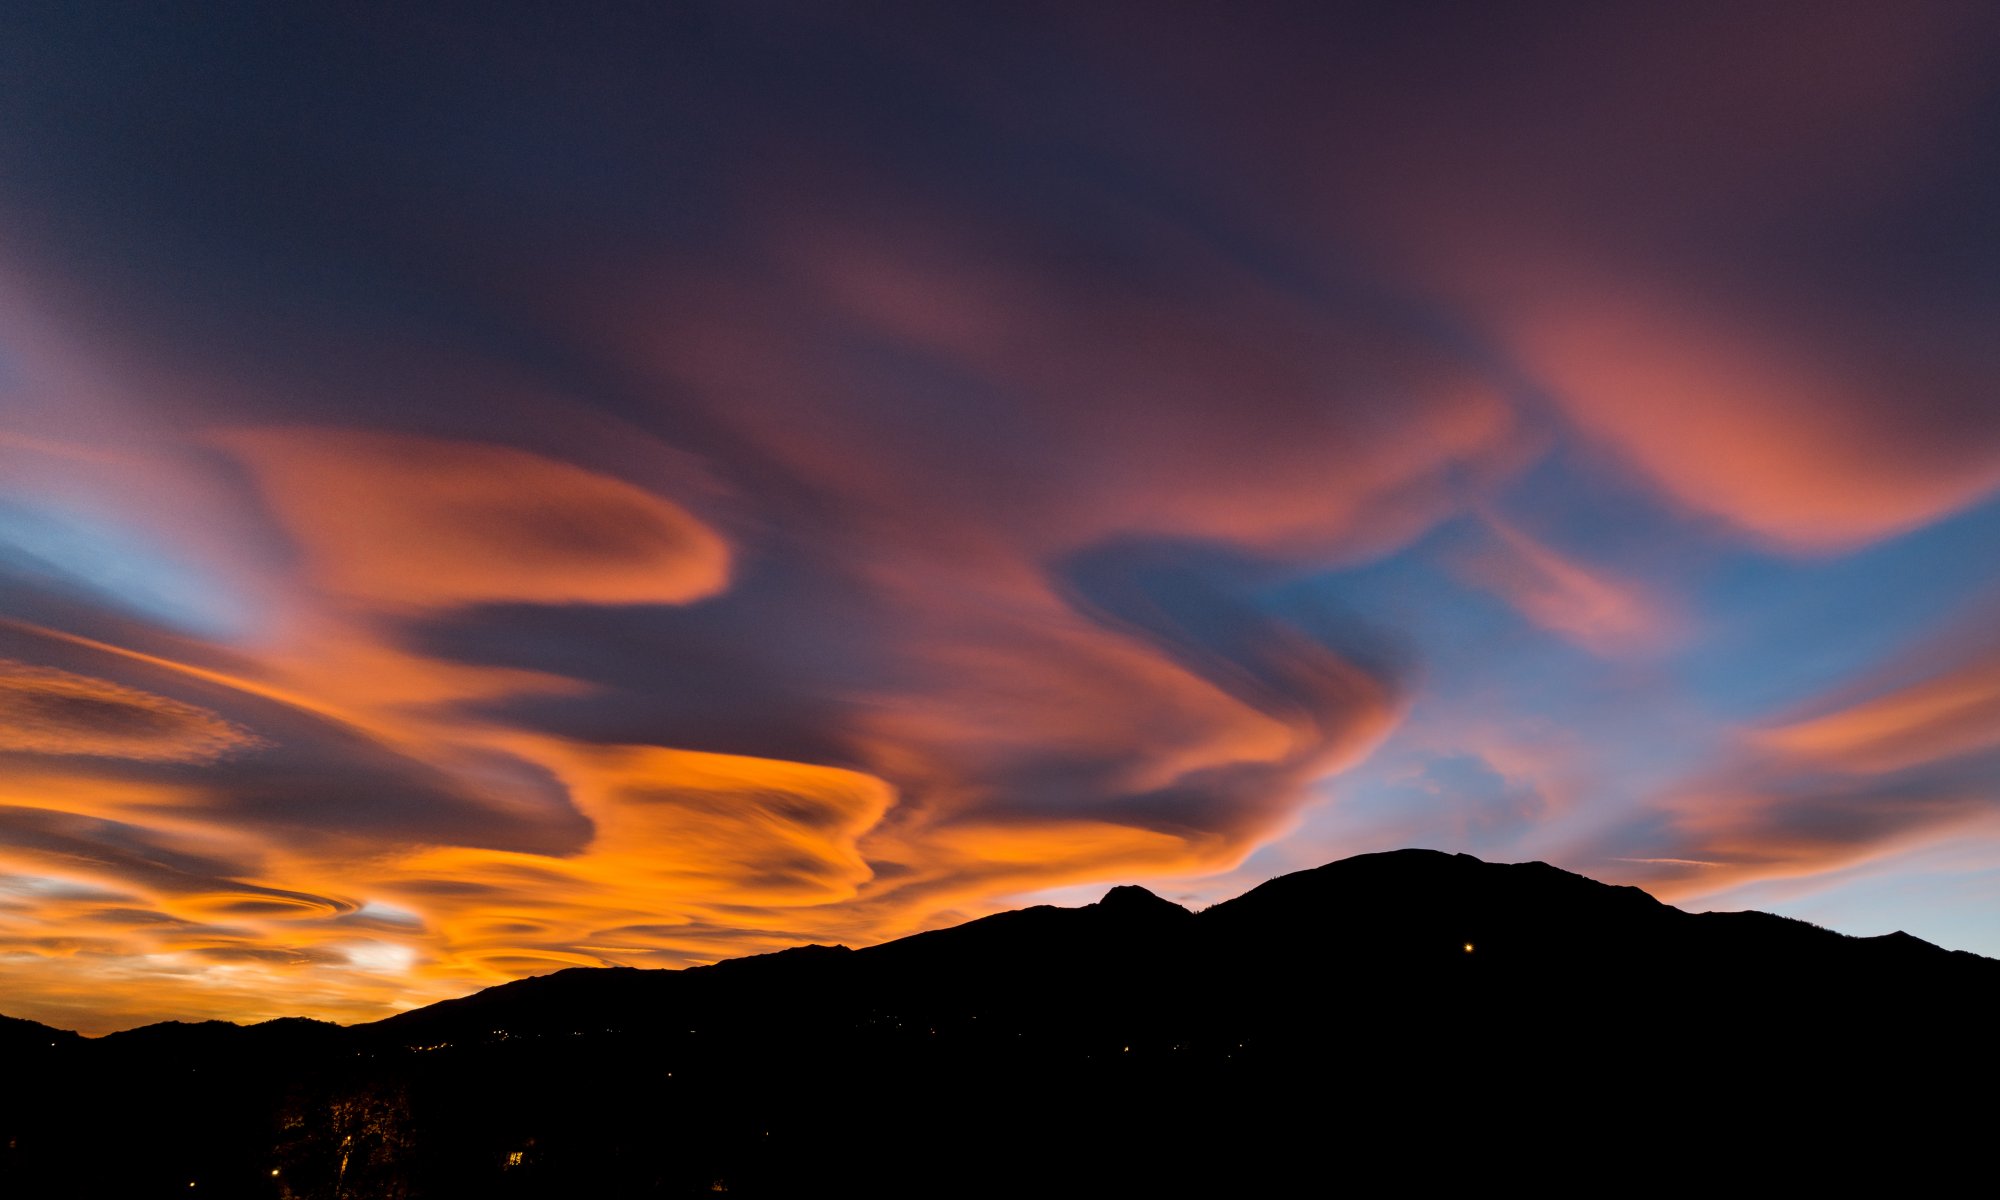 A rare Lenticularis clouds formation during the sunset over the European Alps, Biella, Piedmont, Italy - October 29, 2017 -- Adobe Stock